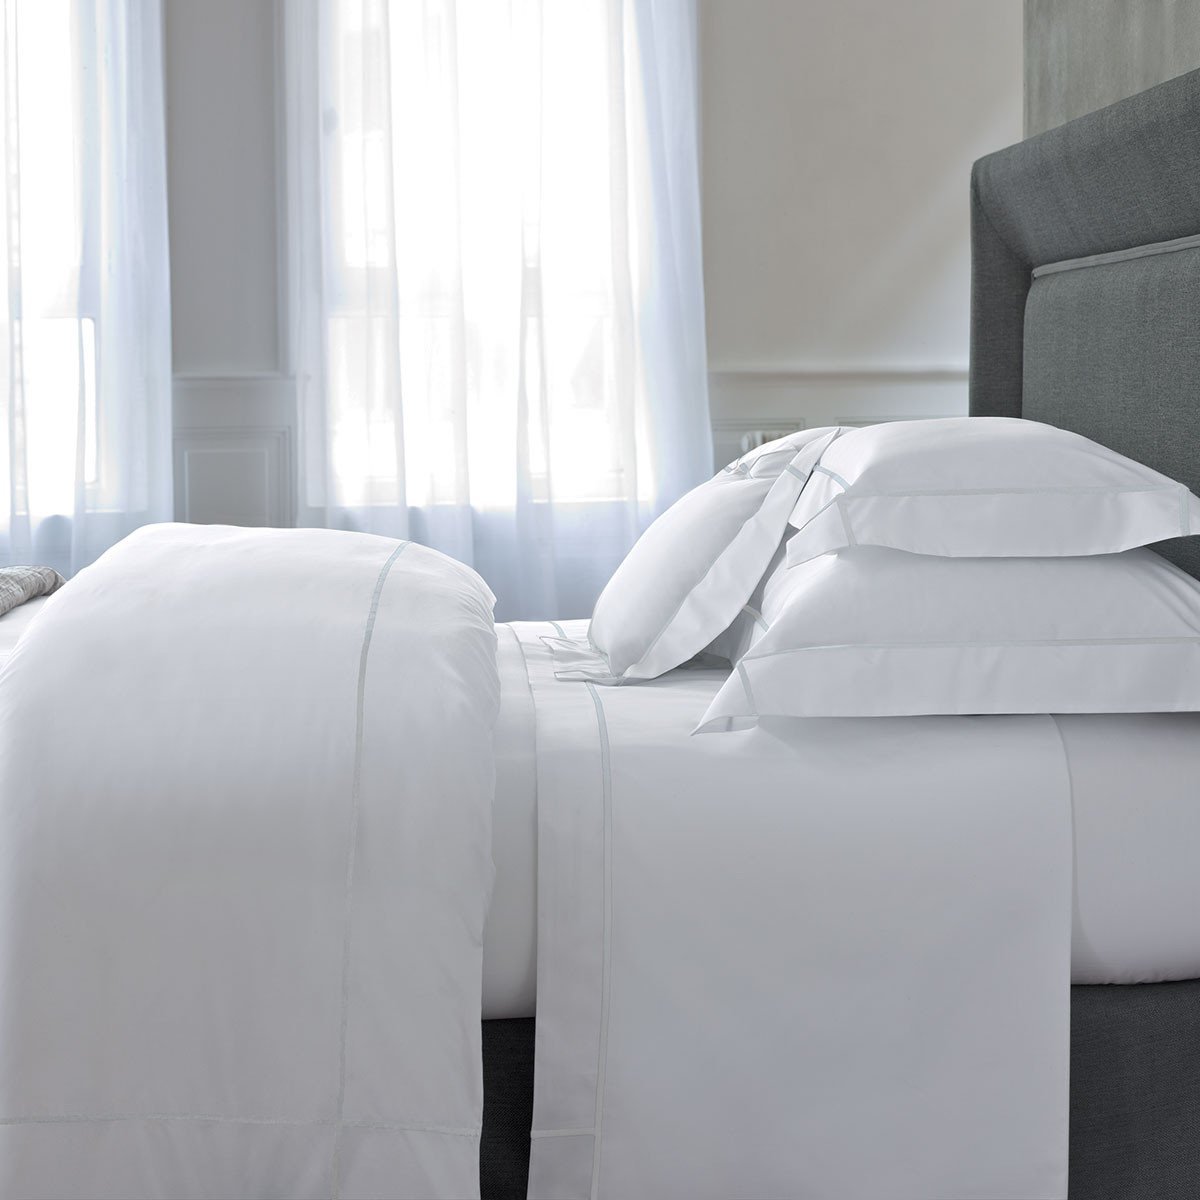 Athena Silver Bedding Collection by Yves Delorme | Fig Linens - White bed linens, duvet, sheet, sham